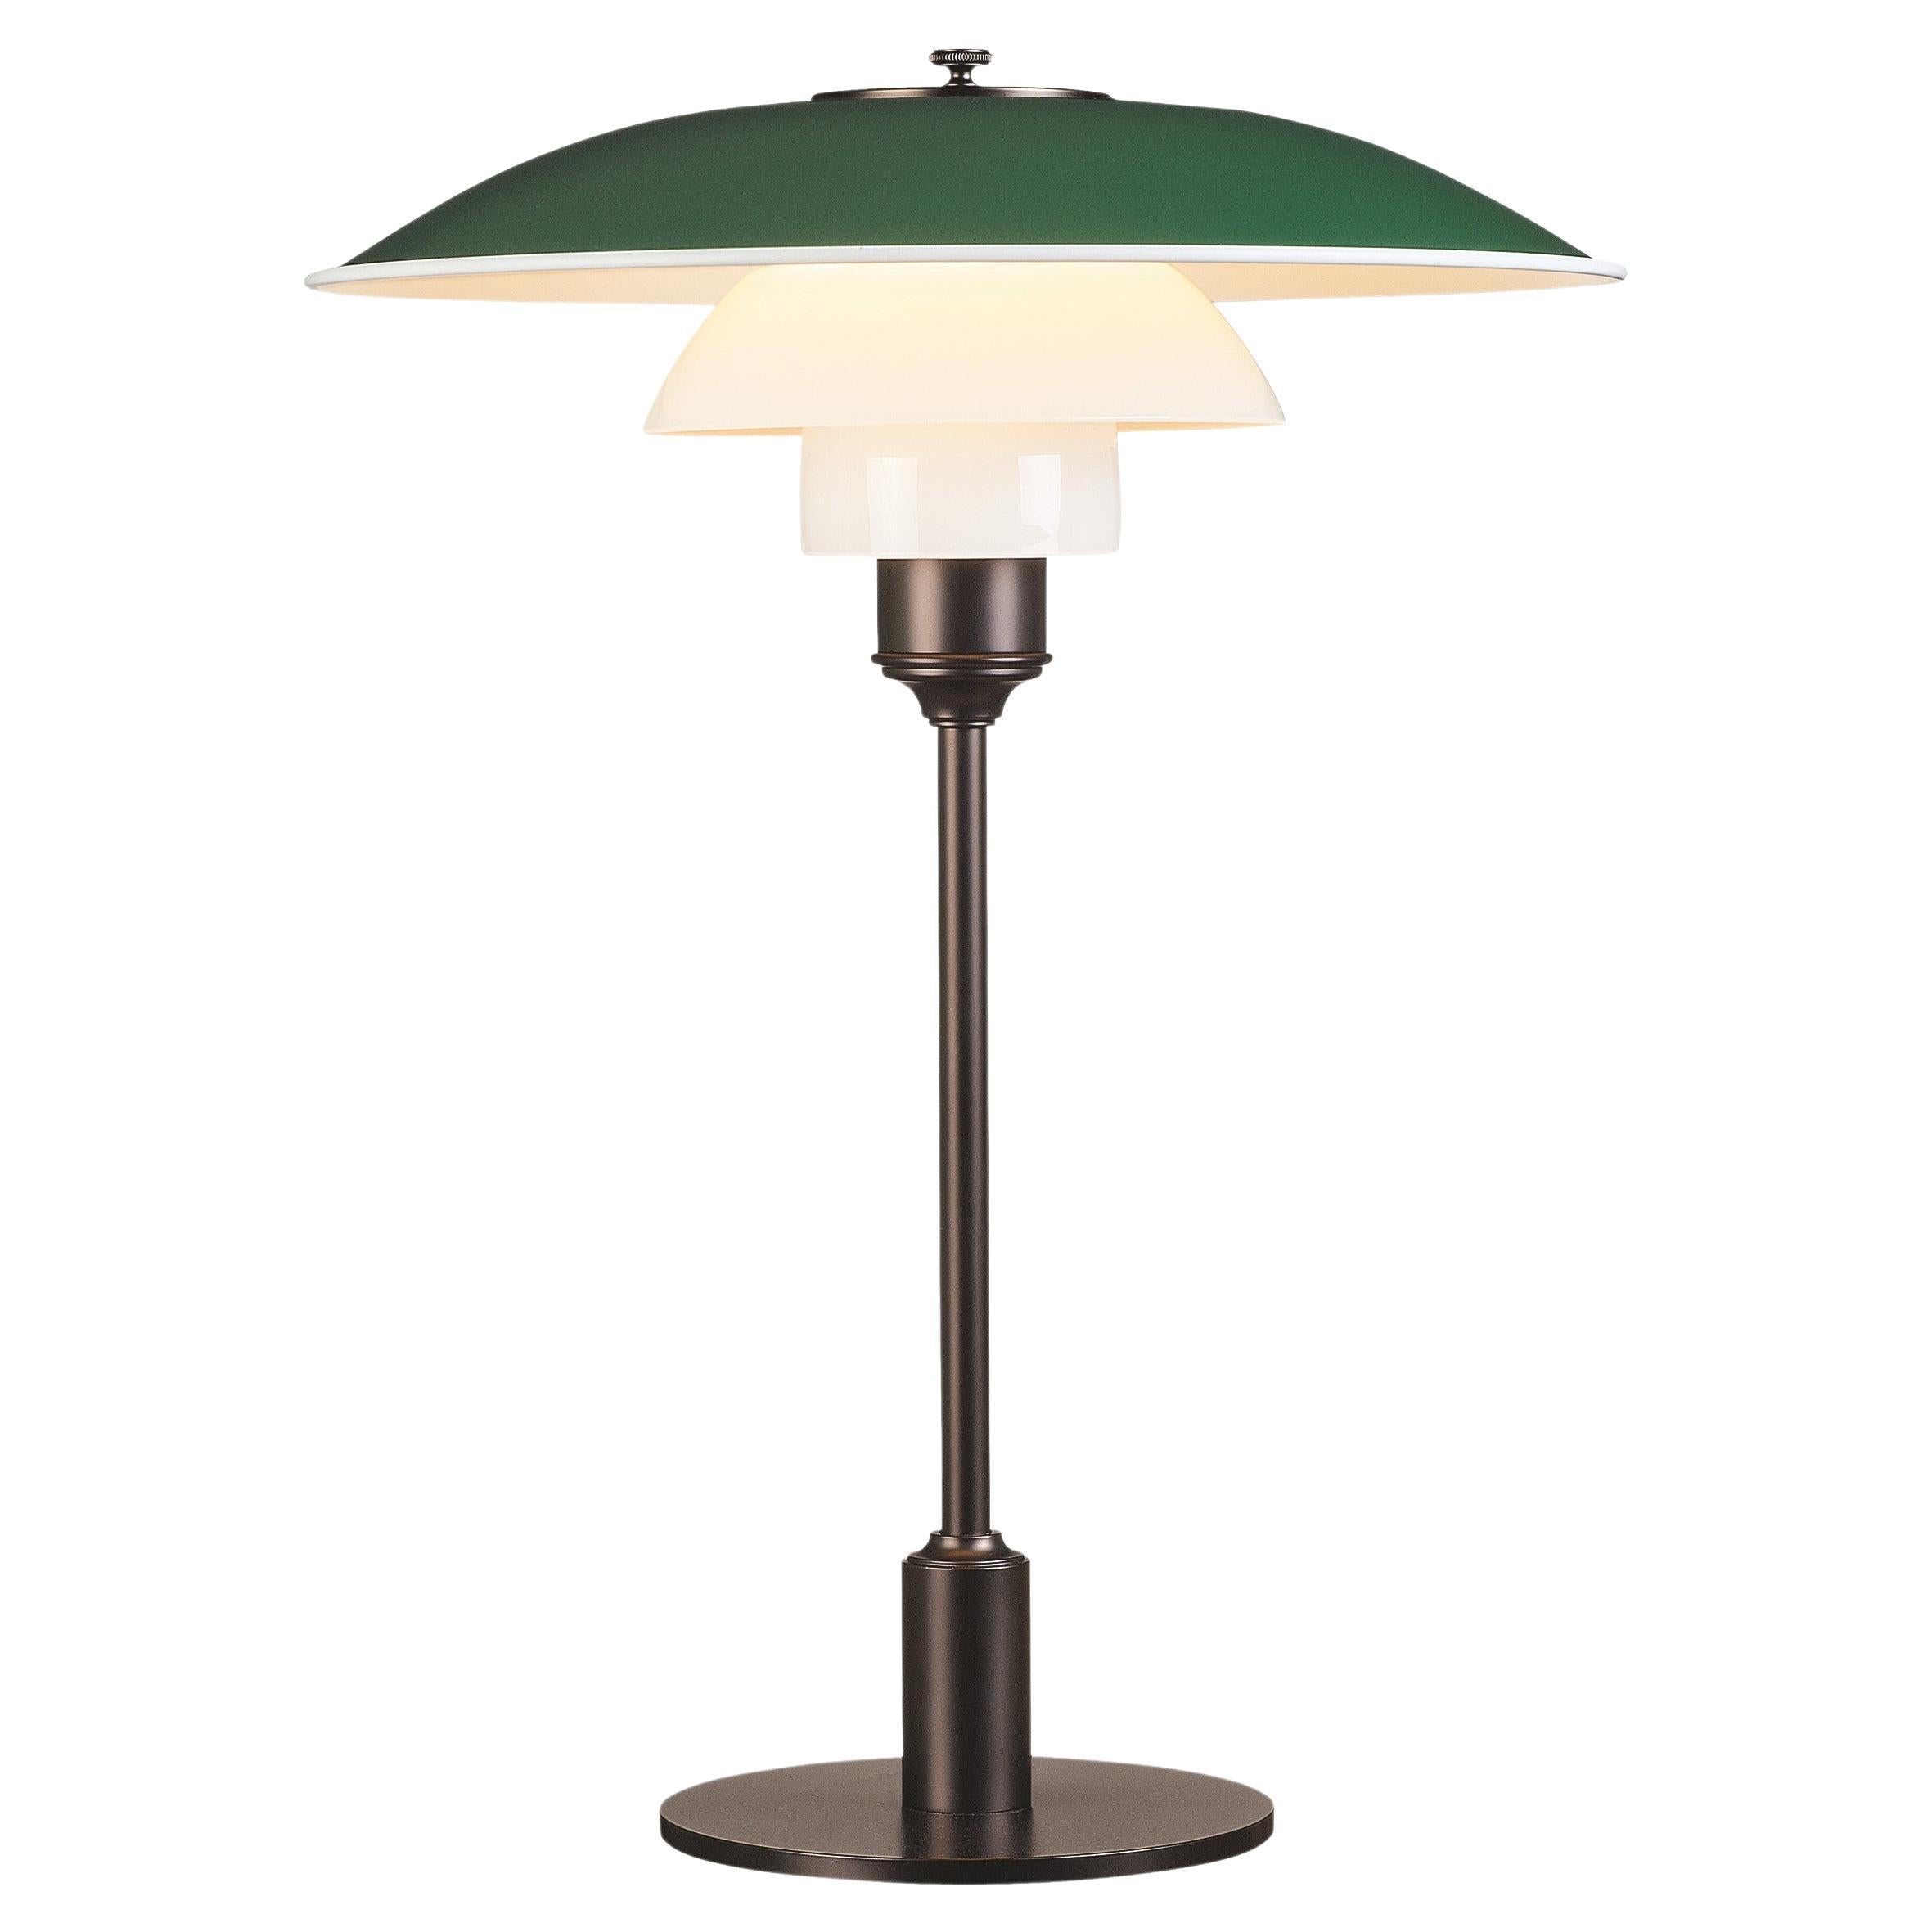 Louis Poulsen PH 3½-2½ Color Table Lamp in Green by Poul Henningsen